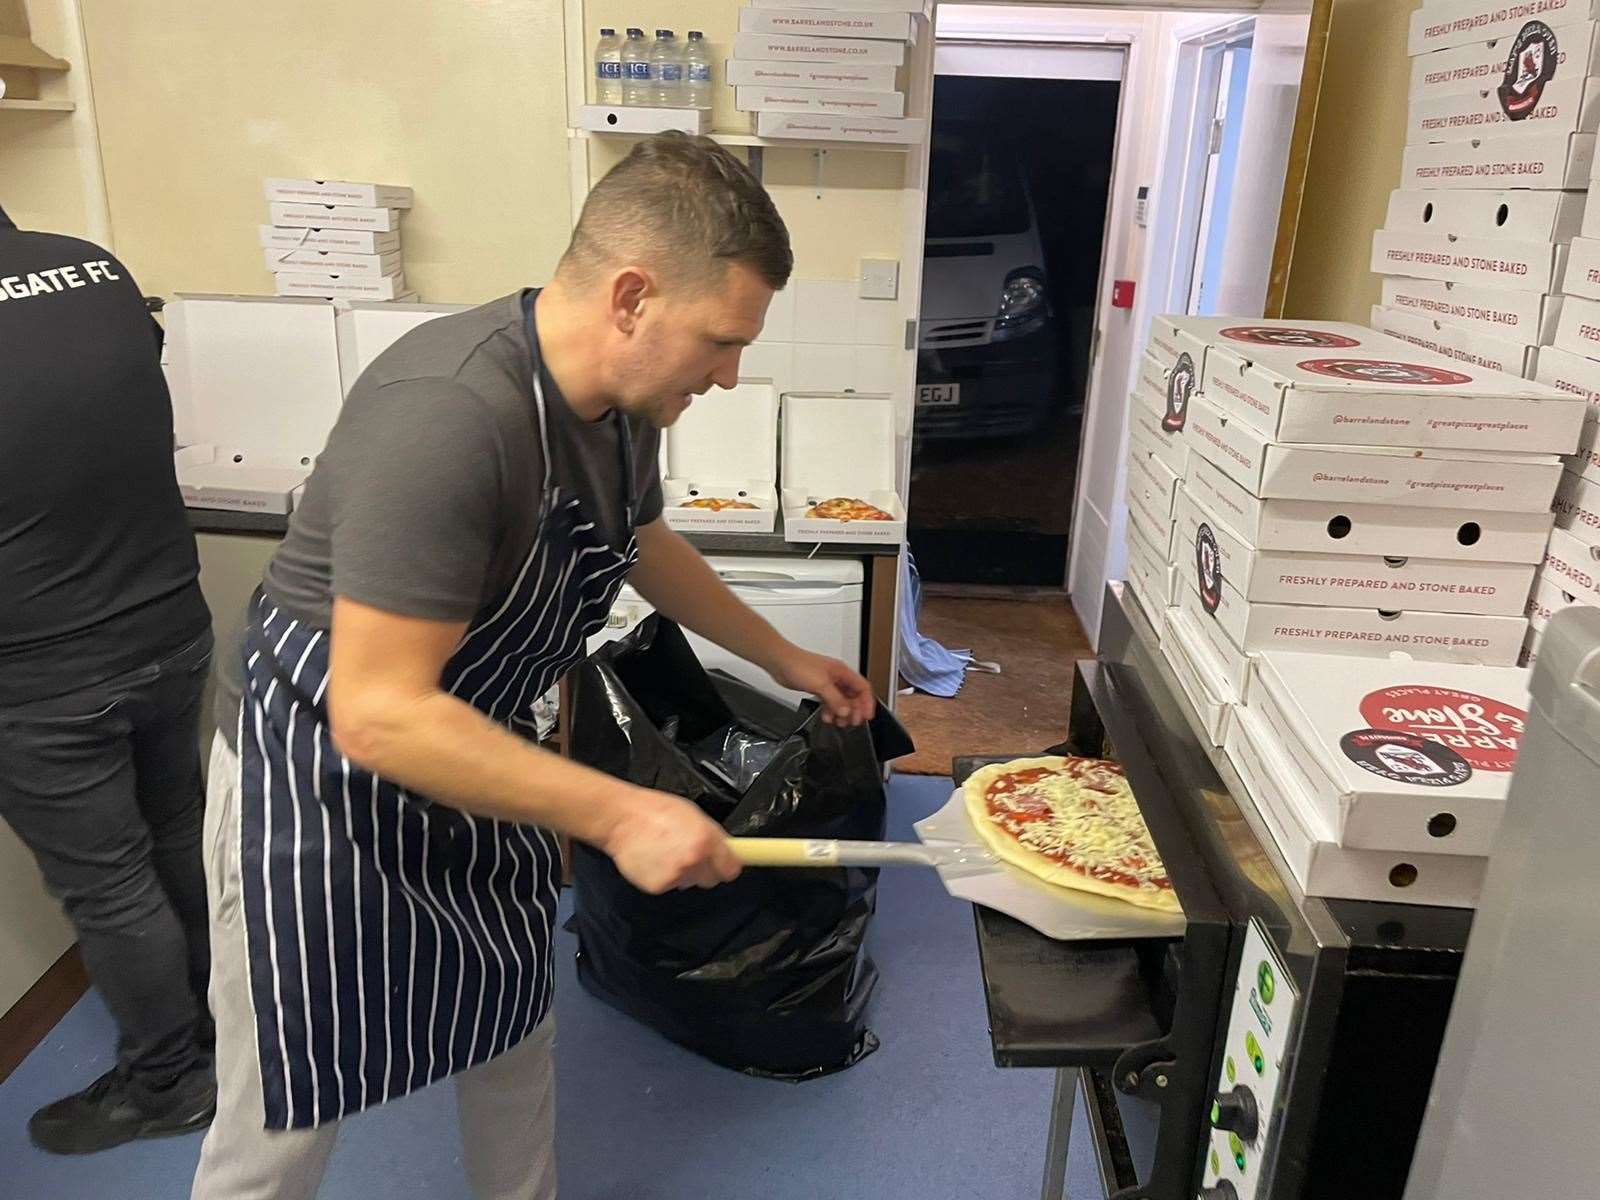 The club played a big role in dishing out pizzas to truckers at Manston at Christmas